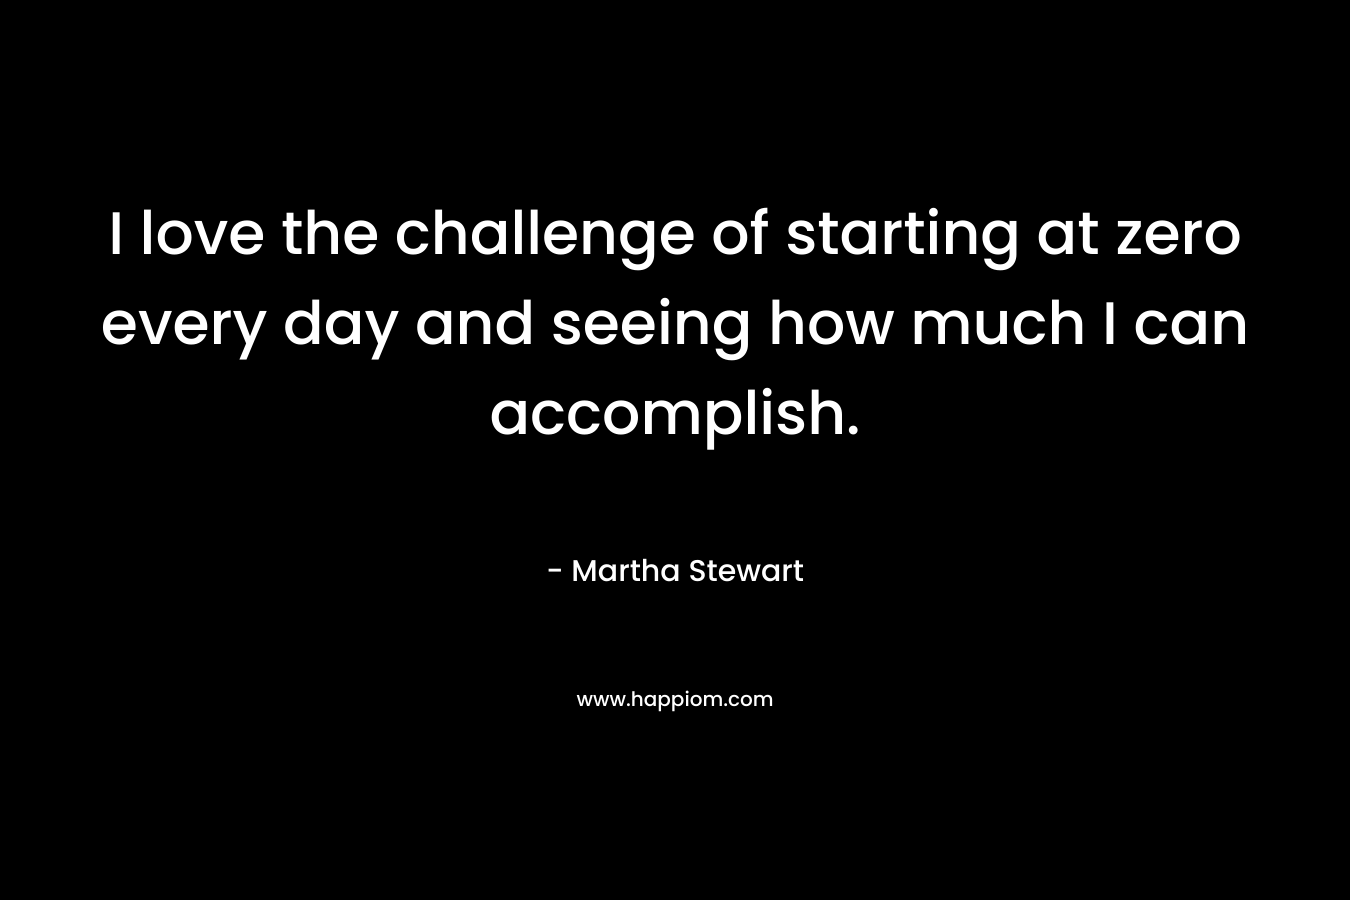 I love the challenge of starting at zero every day and seeing how much I can accomplish.